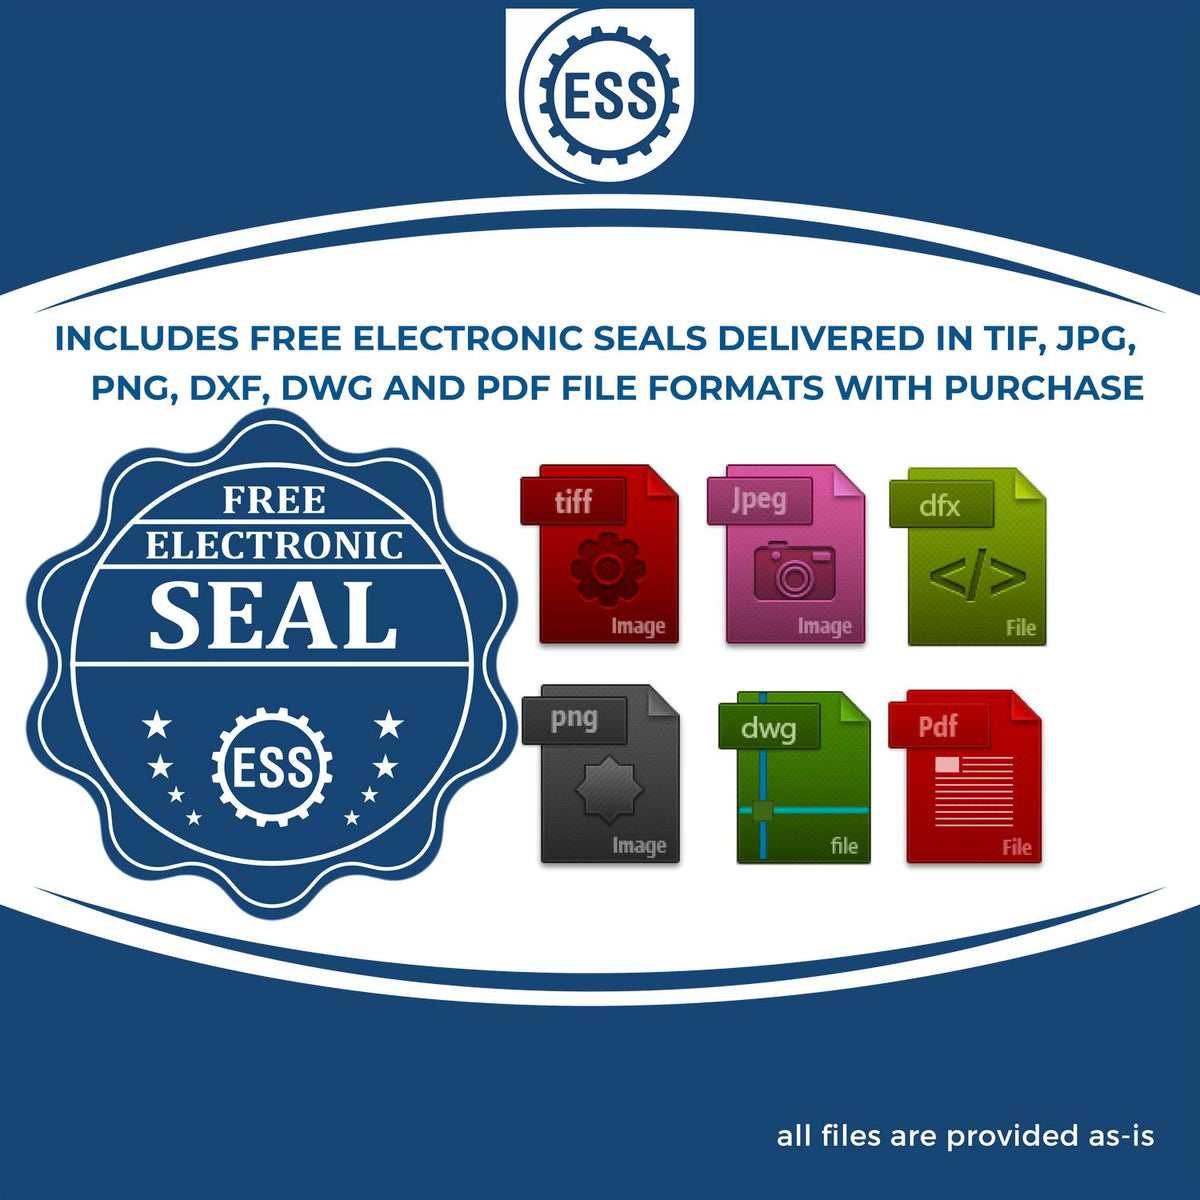 An infographic for the free electronic seal for the Extended Long Reach Florida Architect Seal Embosser illustrating the different file type icons such as DXF, DWG, TIF, JPG and PNG.